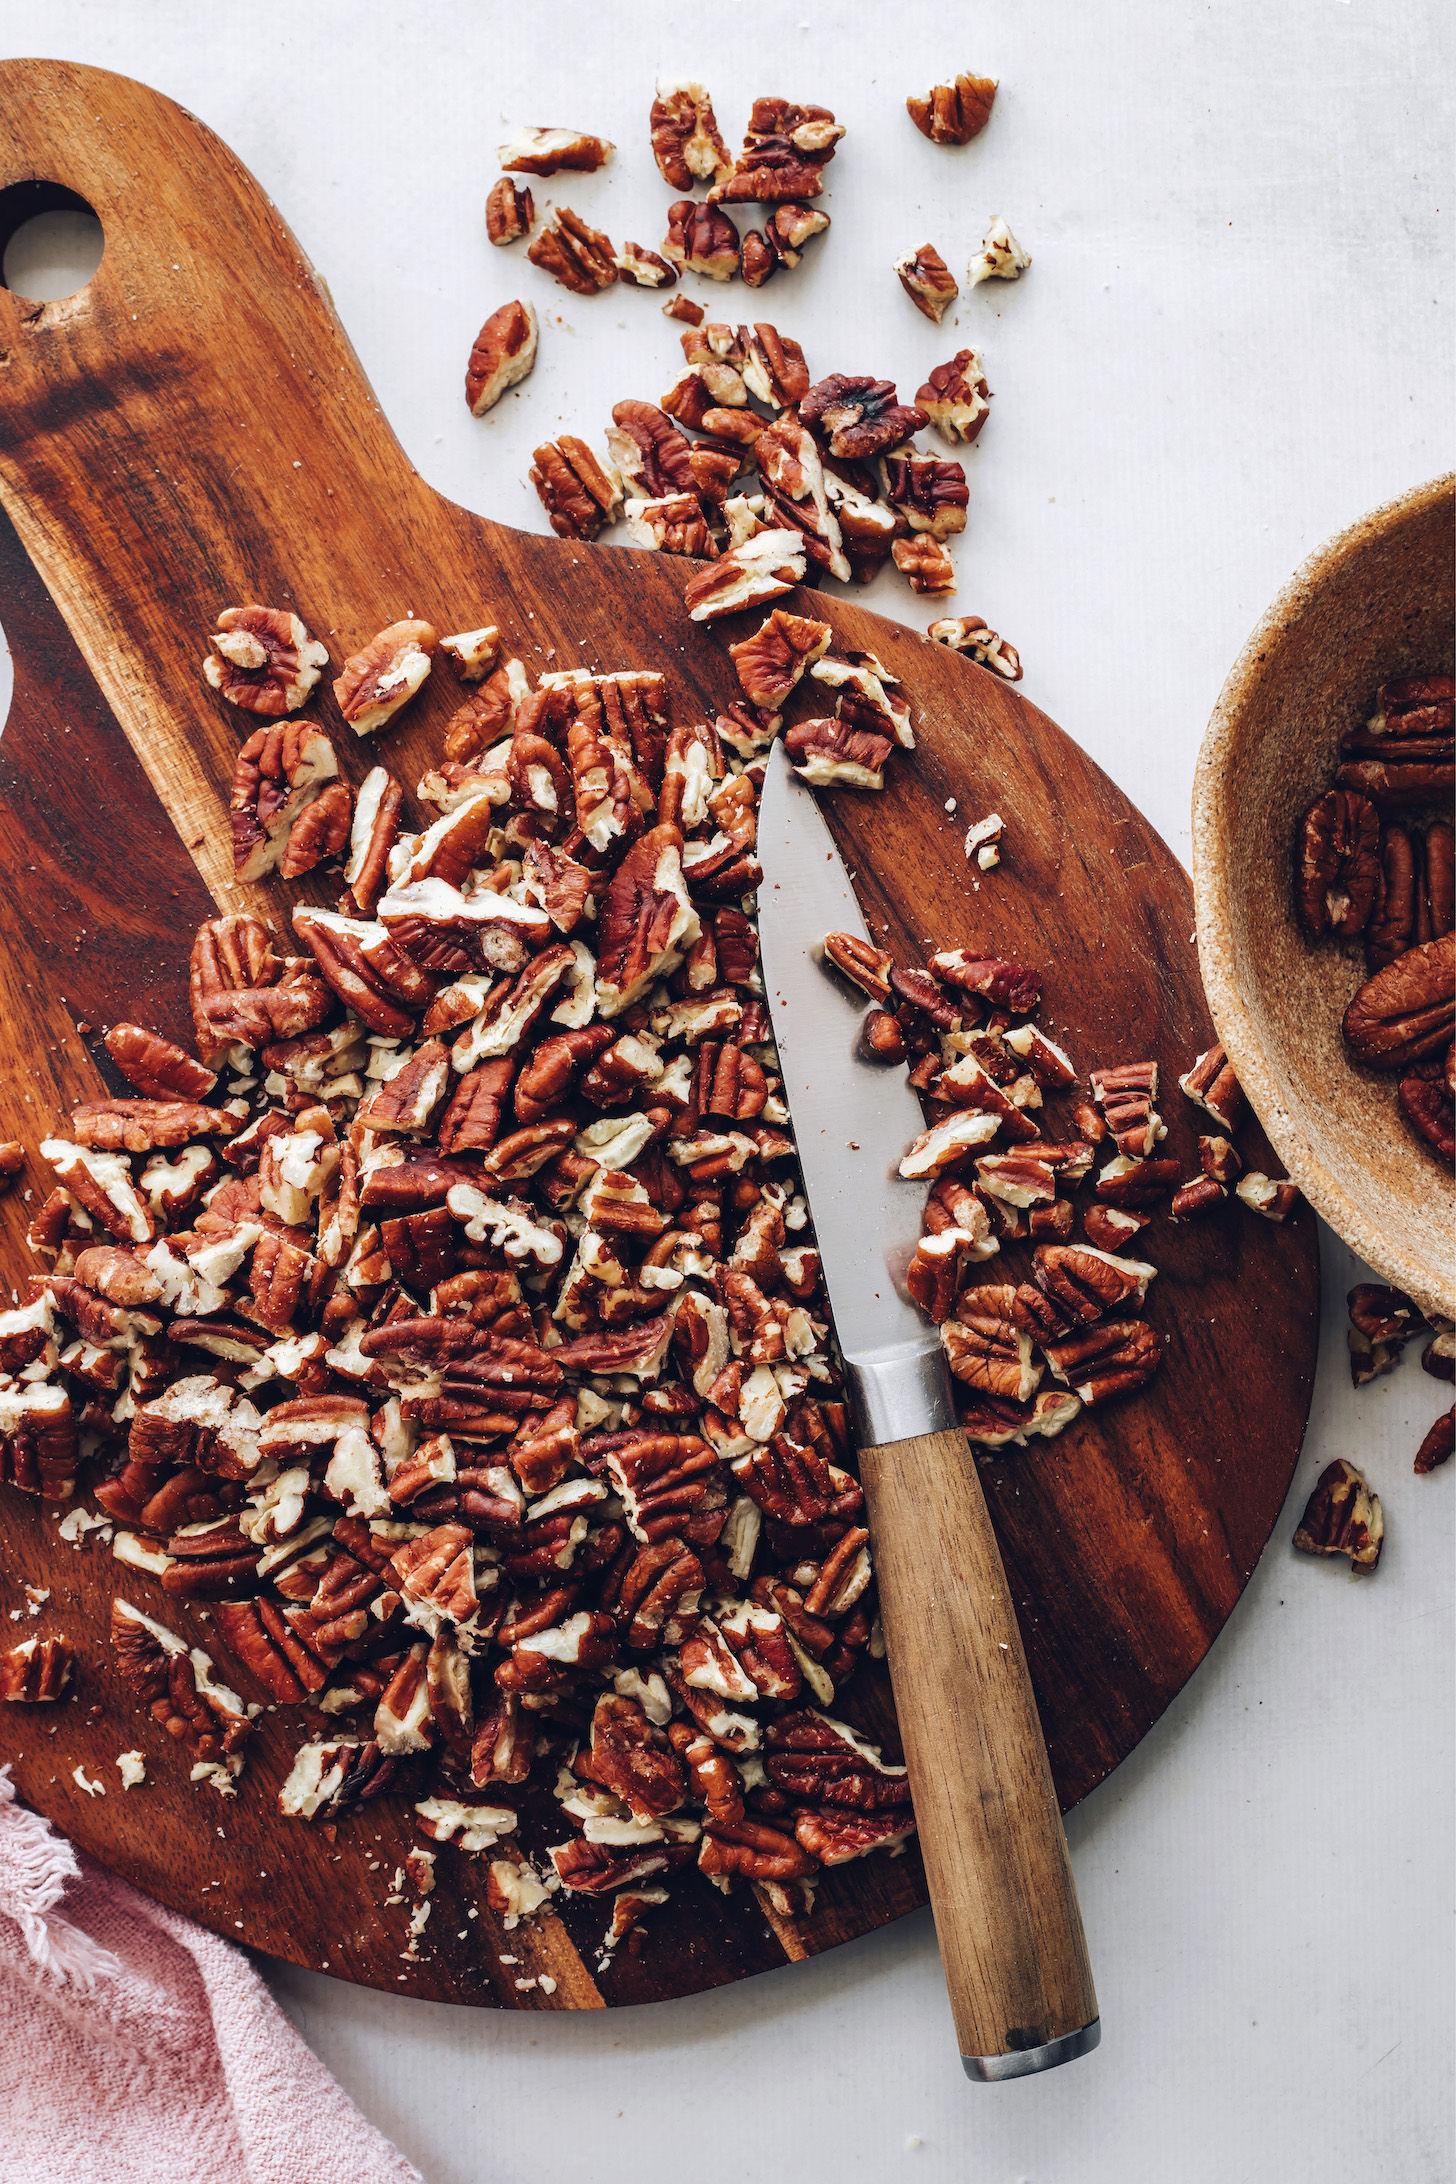 Chopped pecans on a cutting board